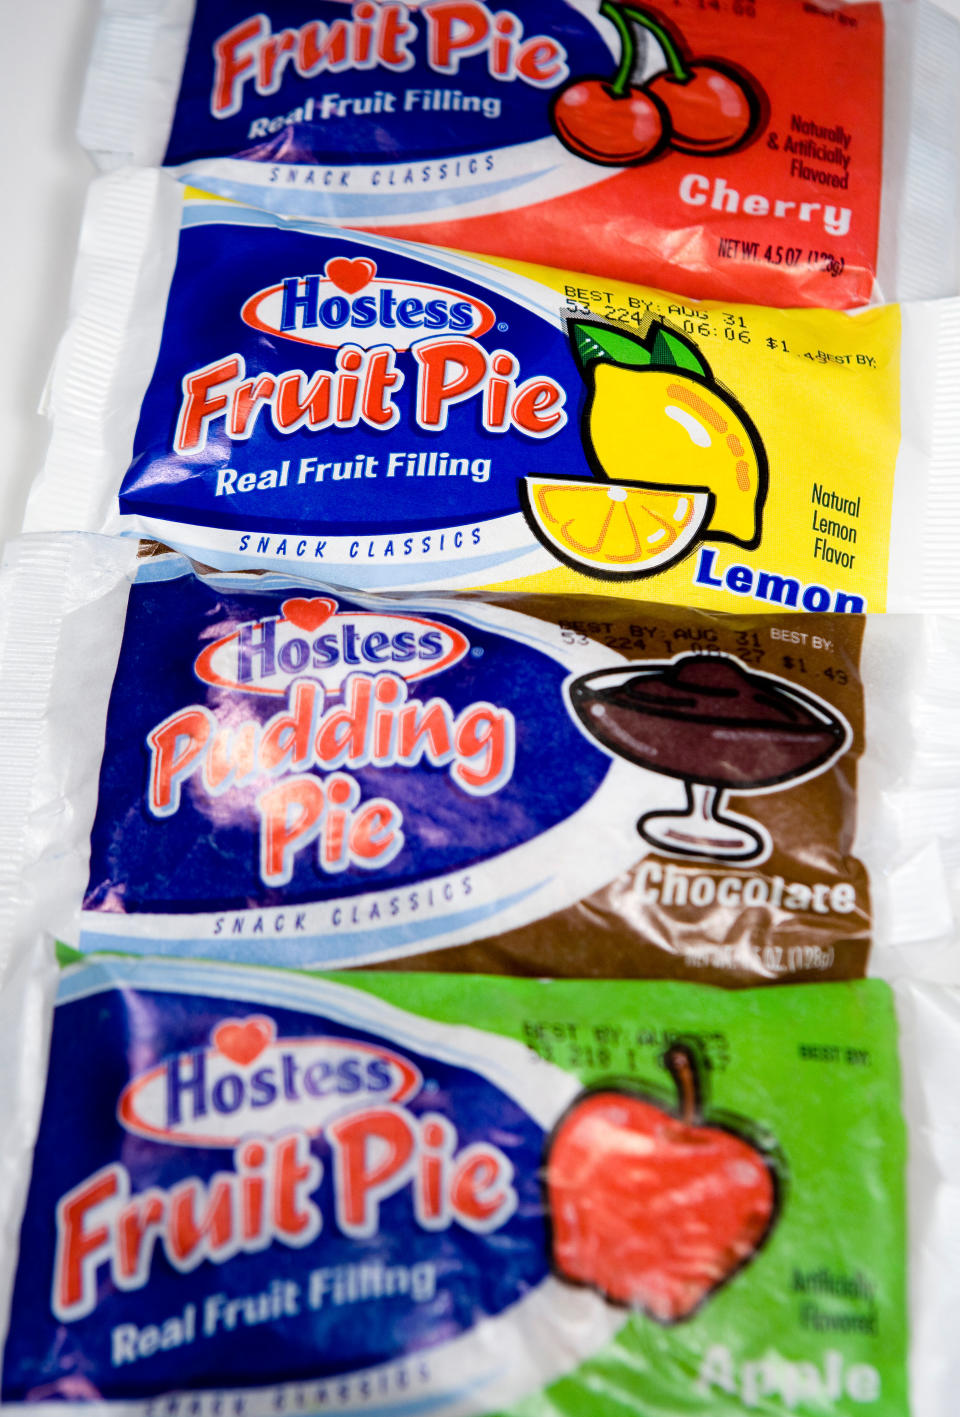 Various flavors of Hostess Pudding Pie and Fruit Pies with "Real Fruit Filling"